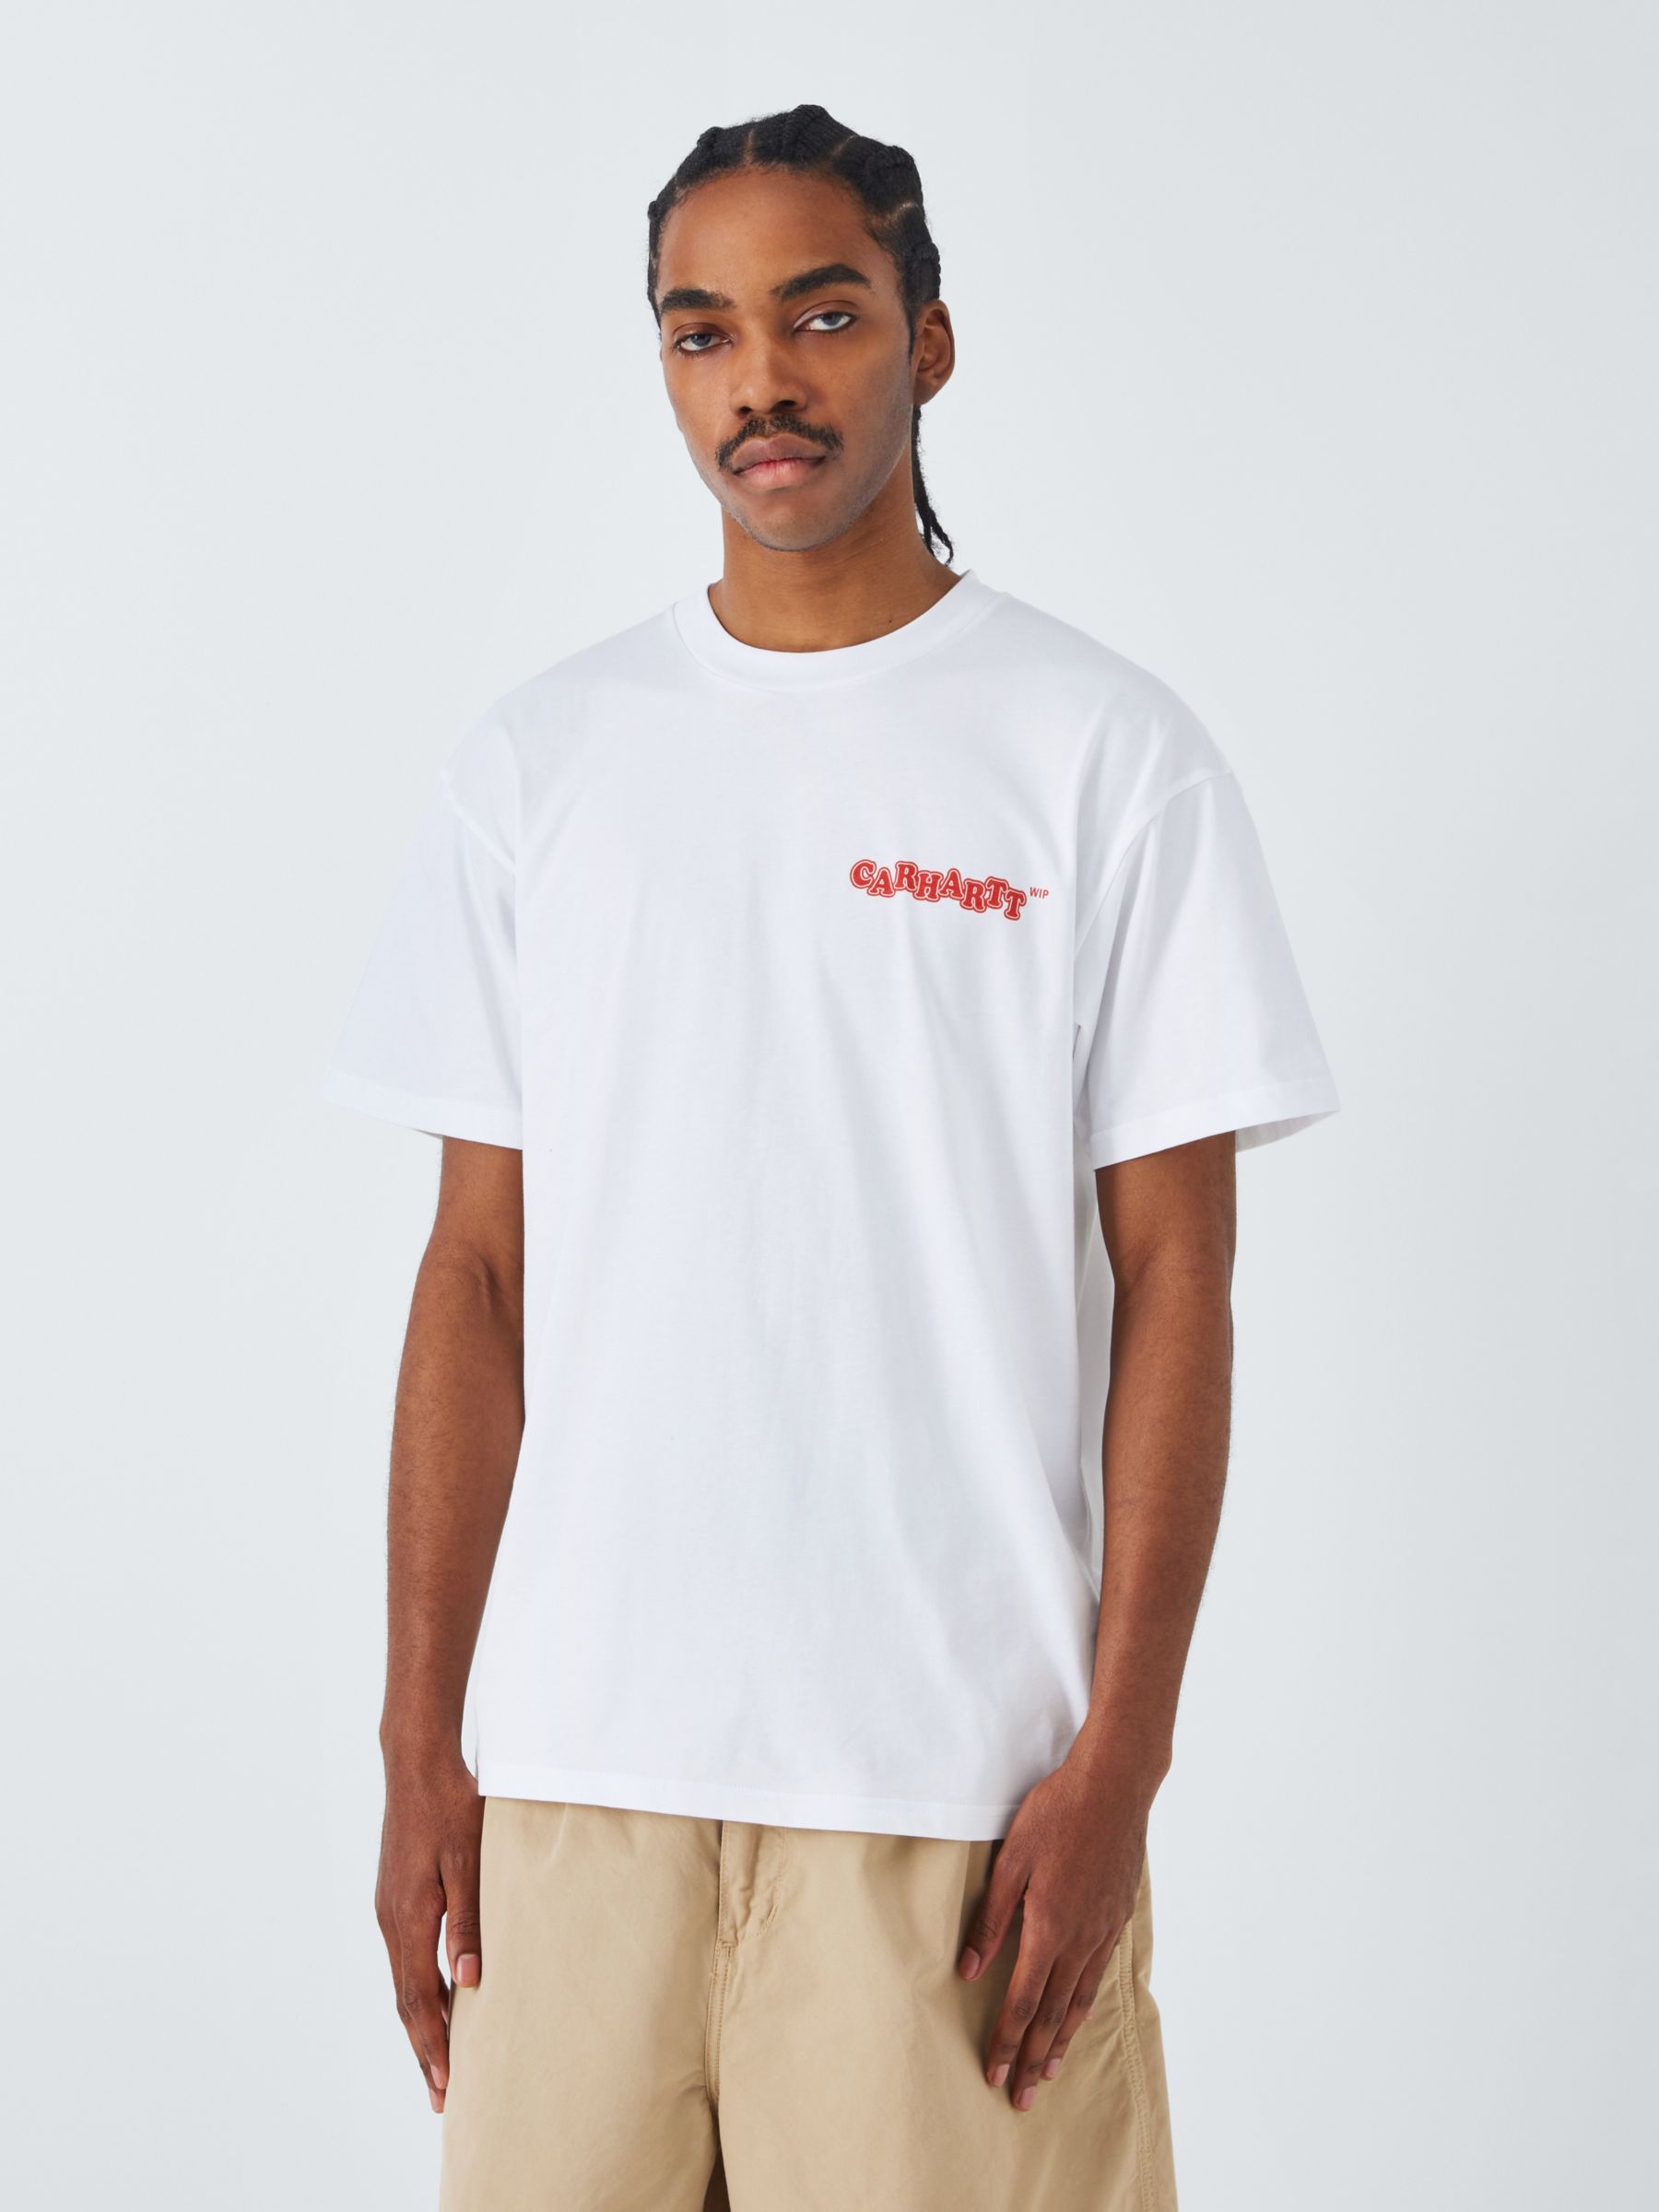 Carhartt WIP Short Sleeve Fast Food T-Shirt, White/Red, M